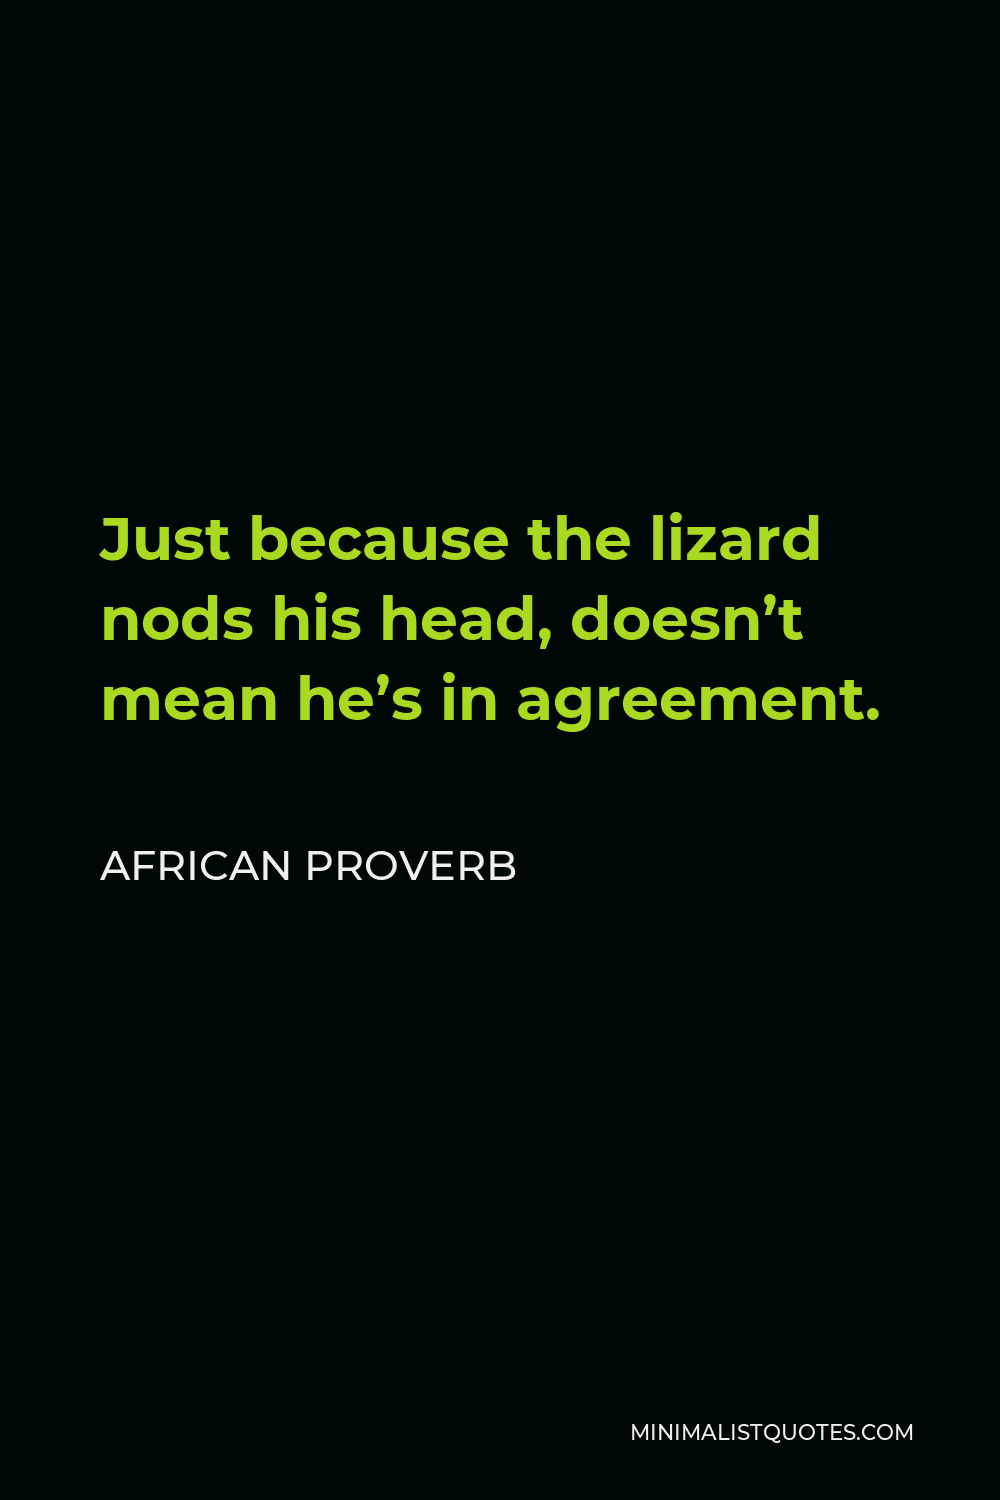 African Proverb Quote - Just because the lizard nods his head, doesn’t mean he’s in agreement.